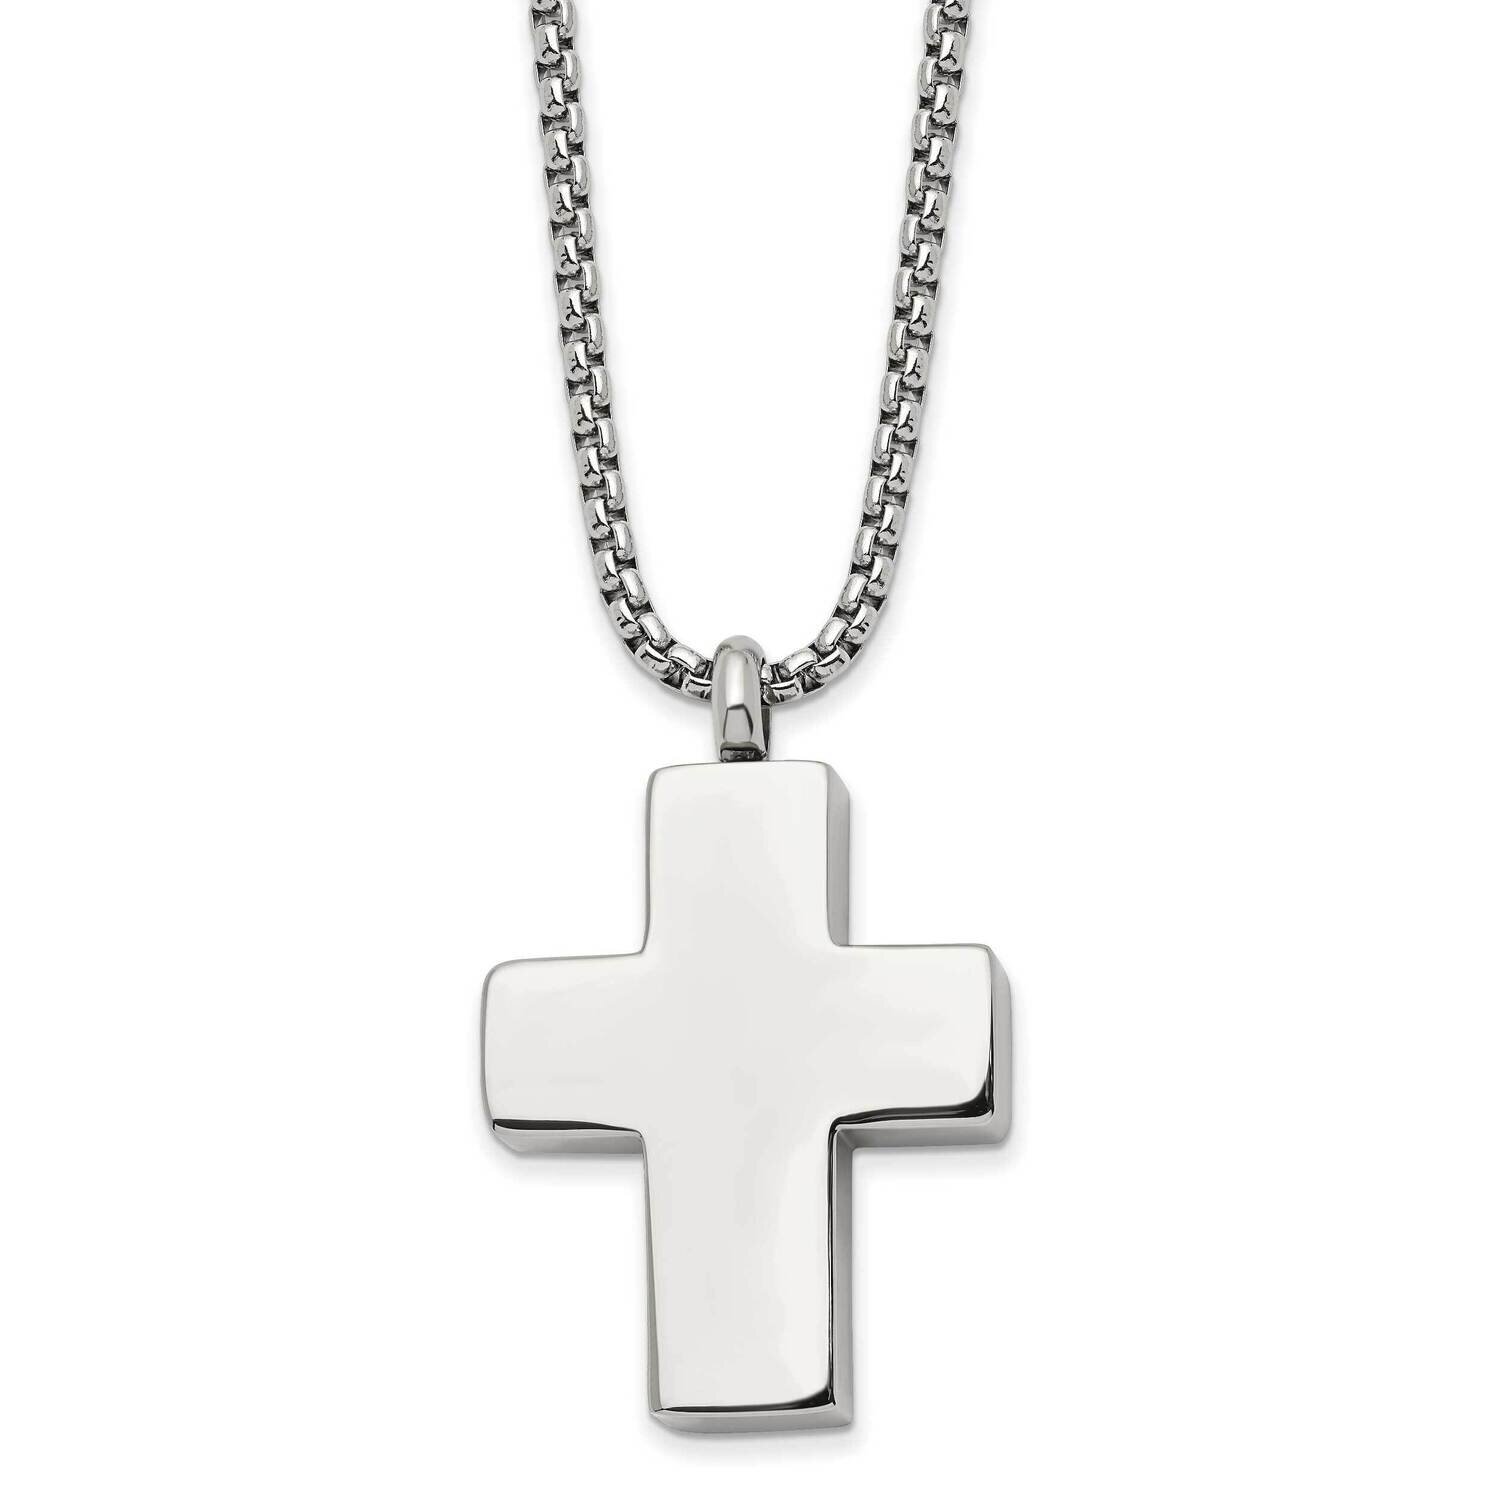 24 Inch Brush & Polished Reversible Cross Ash Holder Necklace Stainless Steel SRN2935-24